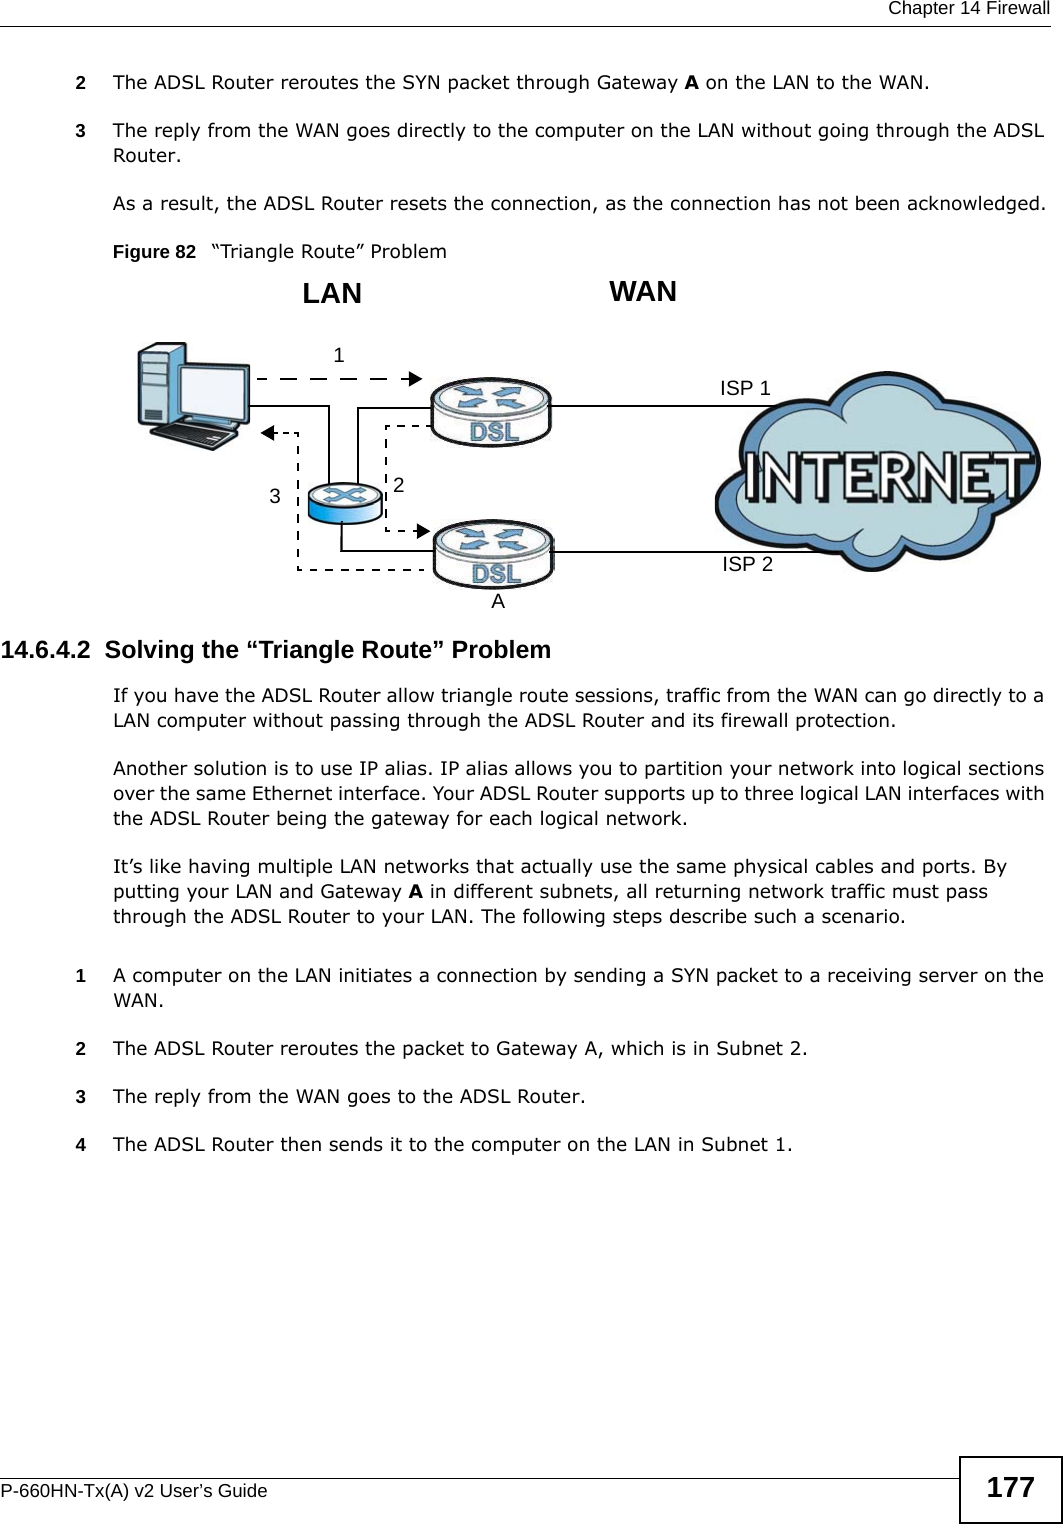  Chapter 14 FirewallP-660HN-Tx(A) v2 User’s Guide 1772The ADSL Router reroutes the SYN packet through Gateway A on the LAN to the WAN. 3The reply from the WAN goes directly to the computer on the LAN without going through the ADSL Router. As a result, the ADSL Router resets the connection, as the connection has not been acknowledged.Figure 82   “Triangle Route” Problem14.6.4.2  Solving the “Triangle Route” ProblemIf you have the ADSL Router allow triangle route sessions, traffic from the WAN can go directly to a LAN computer without passing through the ADSL Router and its firewall protection. Another solution is to use IP alias. IP alias allows you to partition your network into logical sections over the same Ethernet interface. Your ADSL Router supports up to three logical LAN interfaces with the ADSL Router being the gateway for each logical network. It’s like having multiple LAN networks that actually use the same physical cables and ports. By putting your LAN and Gateway A in different subnets, all returning network traffic must pass through the ADSL Router to your LAN. The following steps describe such a scenario.1A computer on the LAN initiates a connection by sending a SYN packet to a receiving server on the WAN. 2The ADSL Router reroutes the packet to Gateway A, which is in Subnet 2. 3The reply from the WAN goes to the ADSL Router. 4The ADSL Router then sends it to the computer on the LAN in Subnet 1.123WANLANAISP 1ISP 2